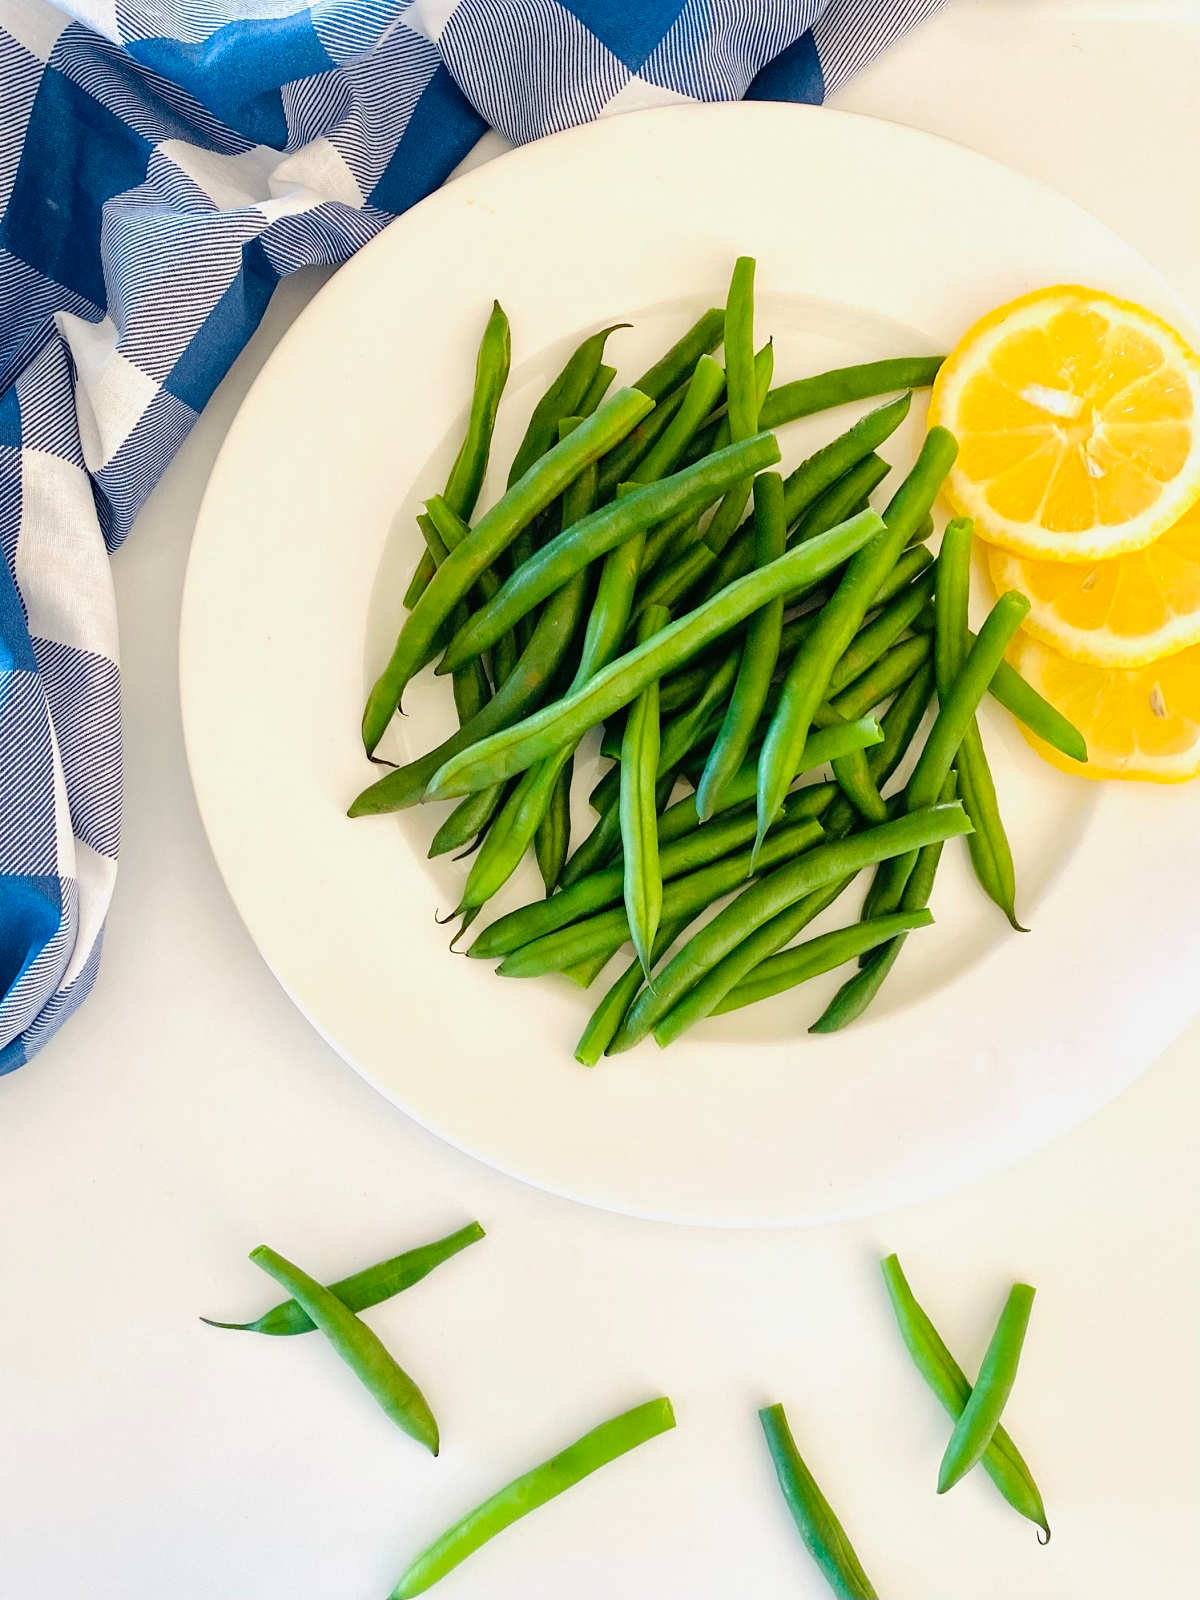 green beans on a plate next to lemon slices and a blue checkered cloth napkin